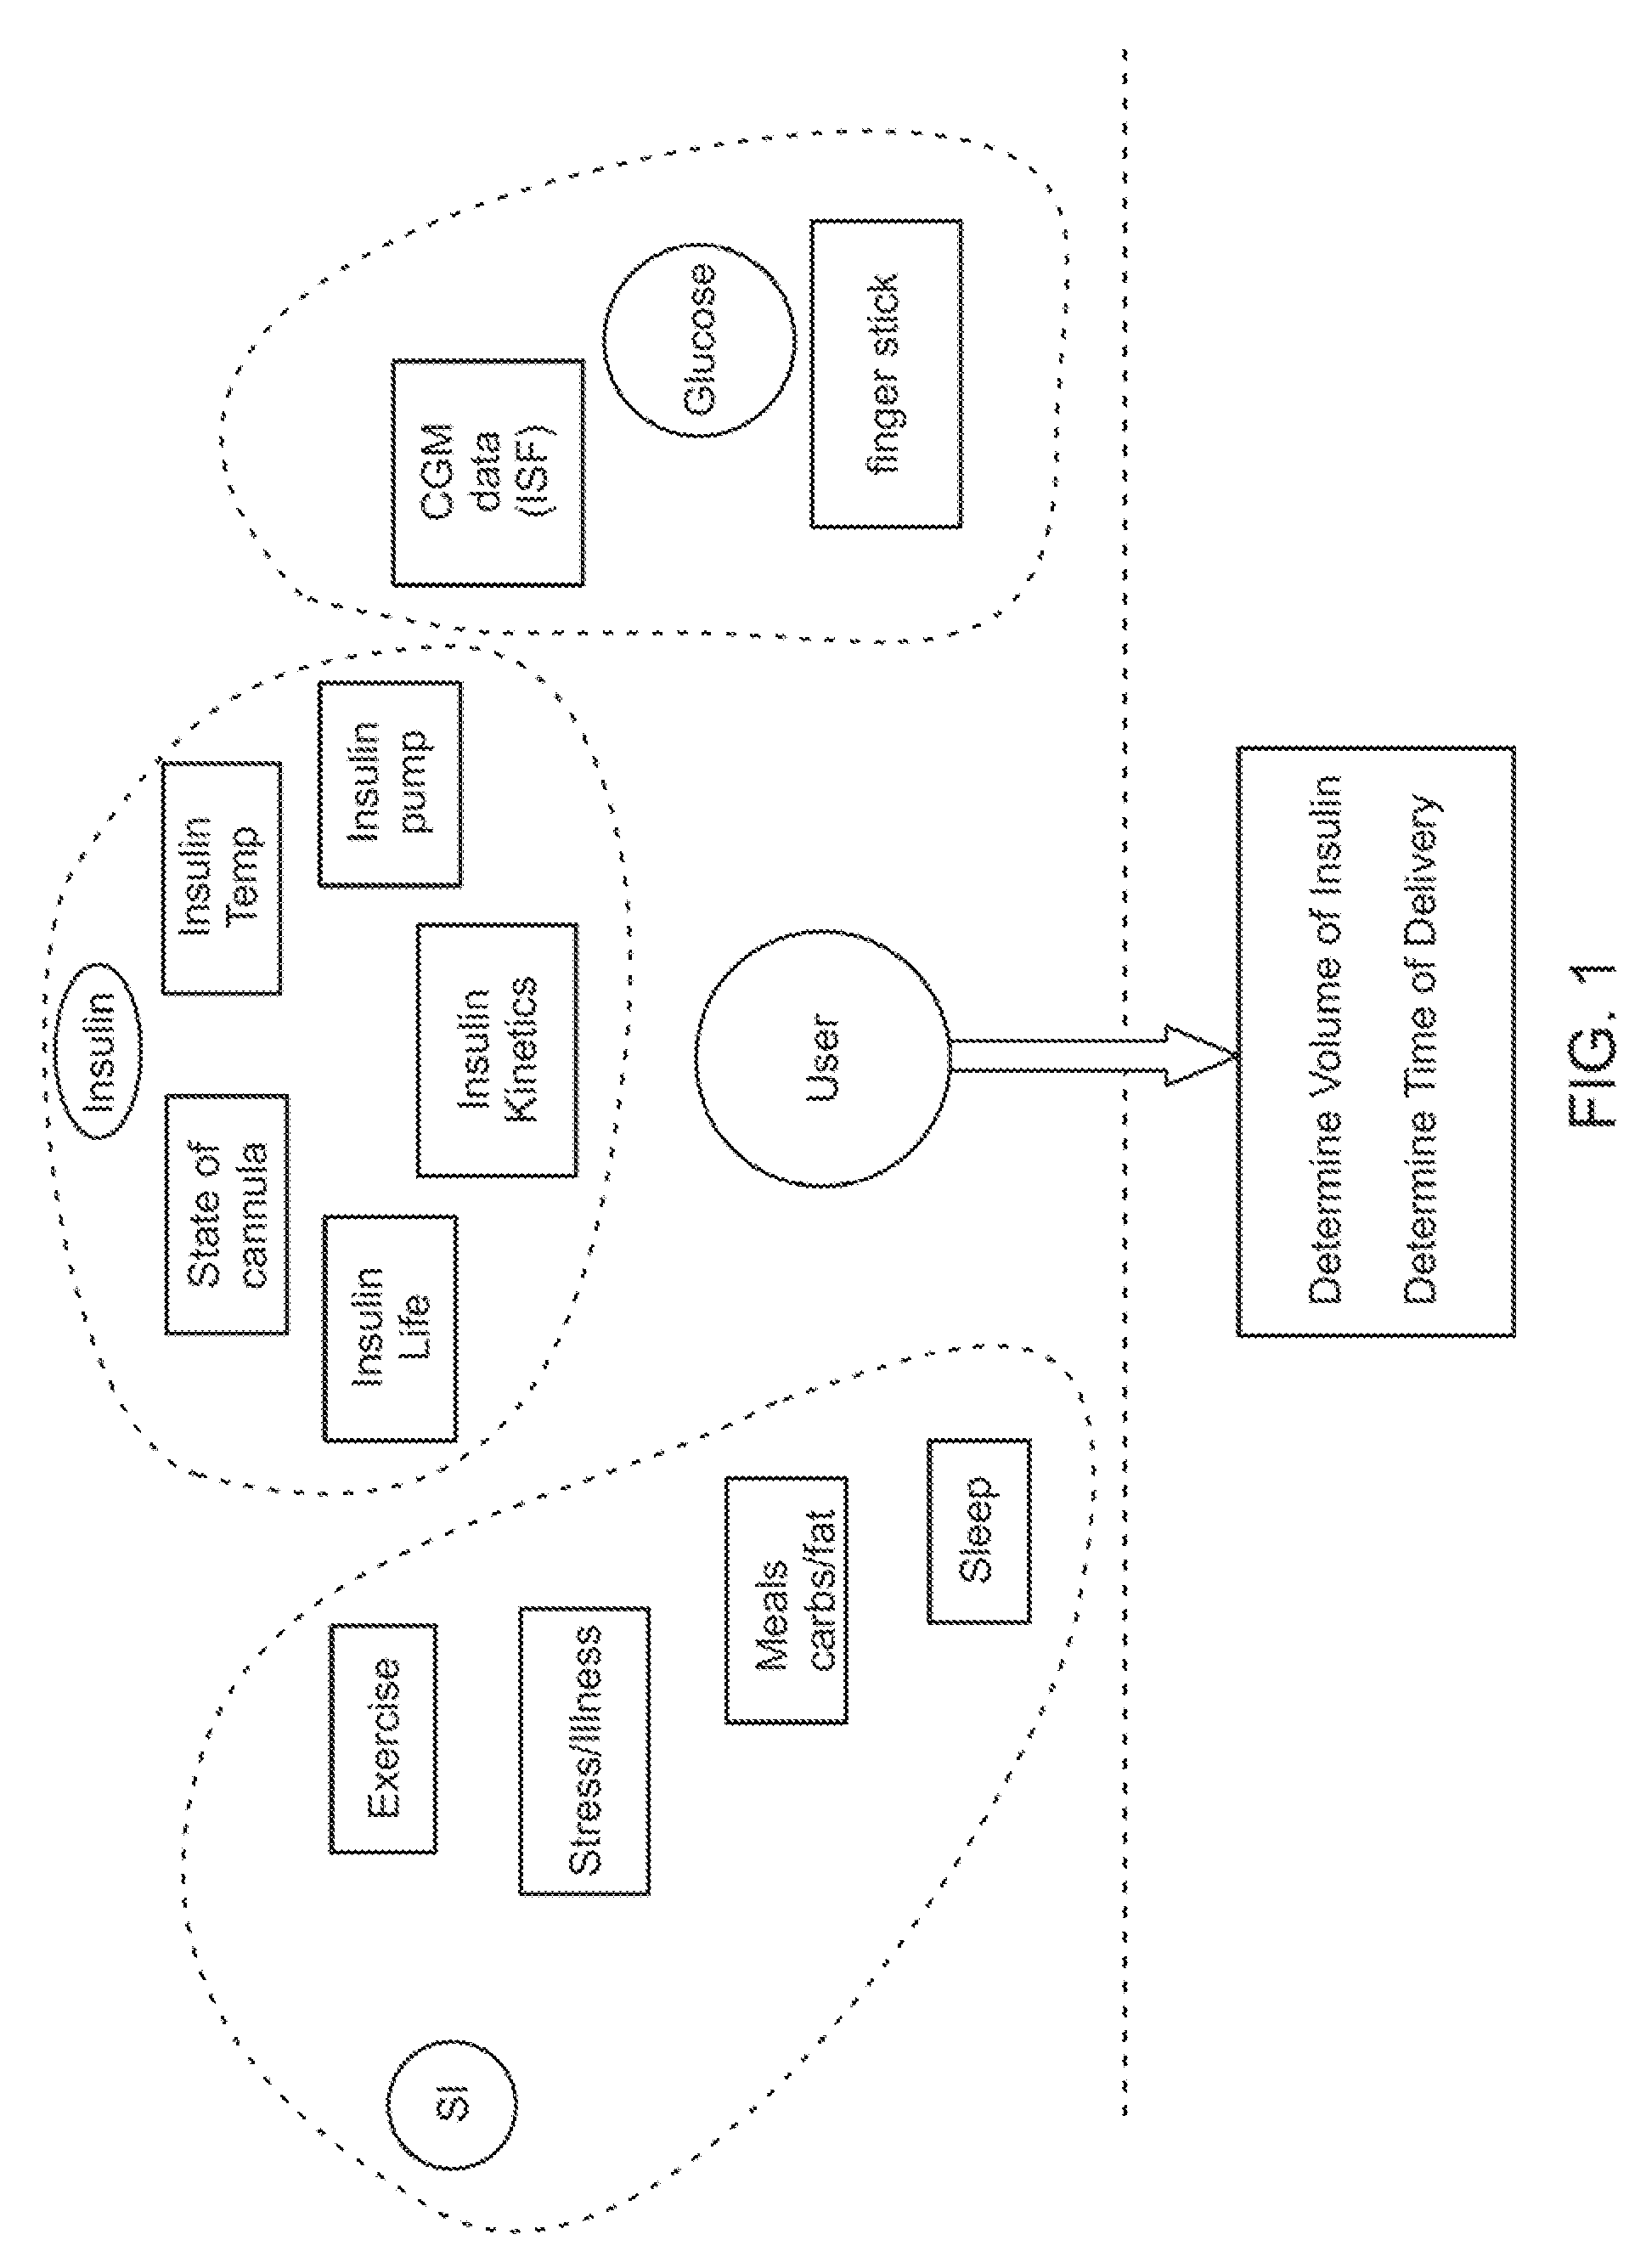 Systems and methods for fluid delivery